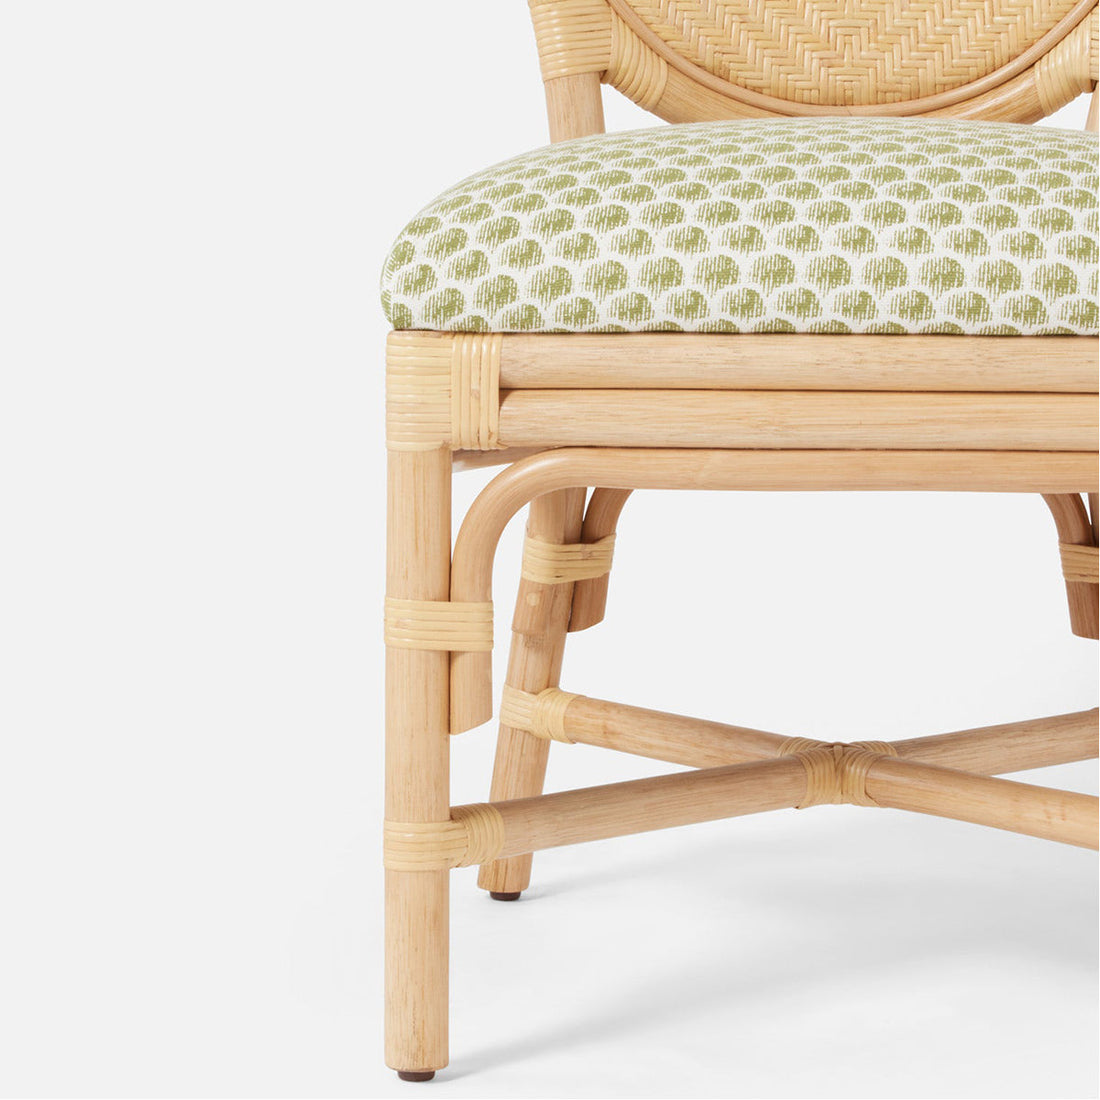 Made Goods Zondra French-Style Woven Dining Chair in Clyde Fabric